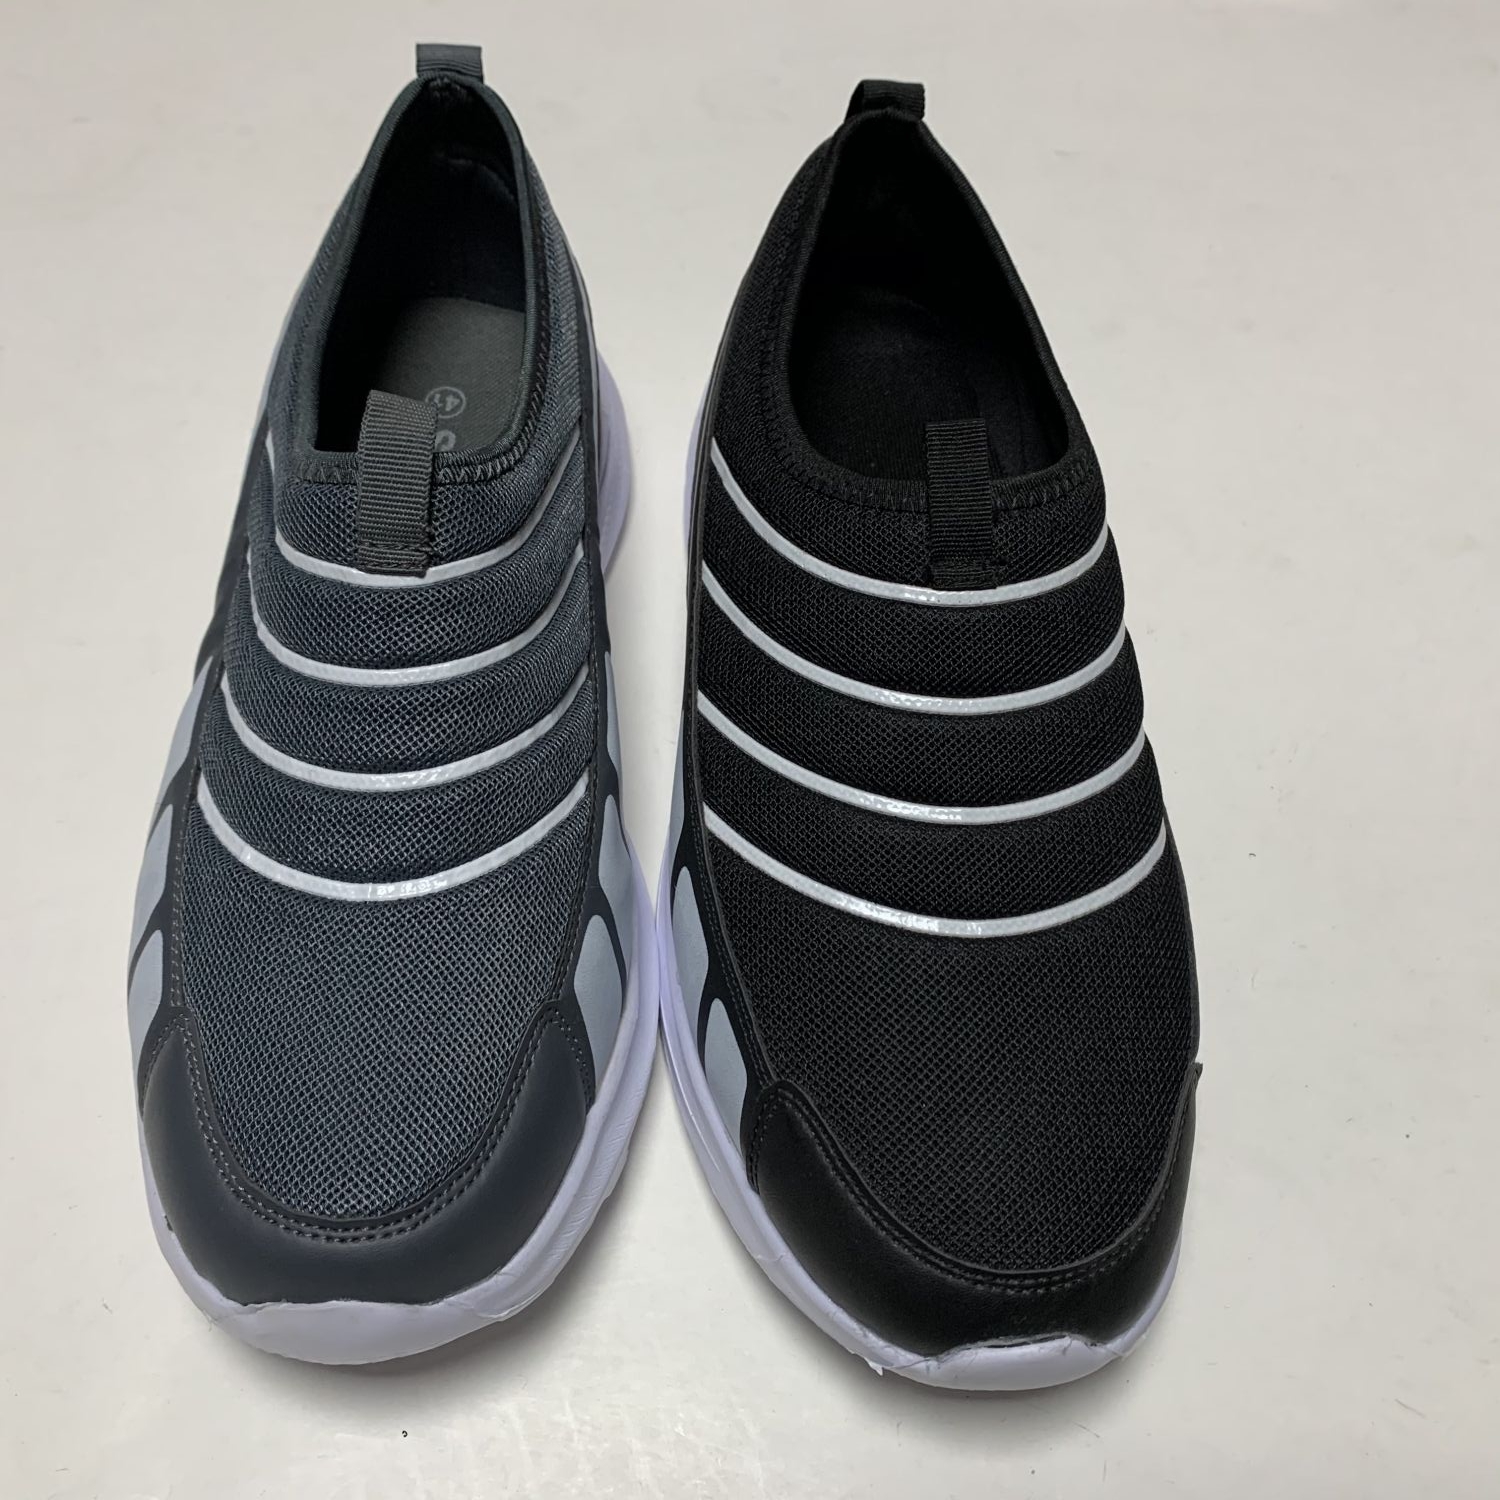 Men's Casual Comfortable Soft Walking Shoes Knit Running Slip-on Lightweight Sneakers 